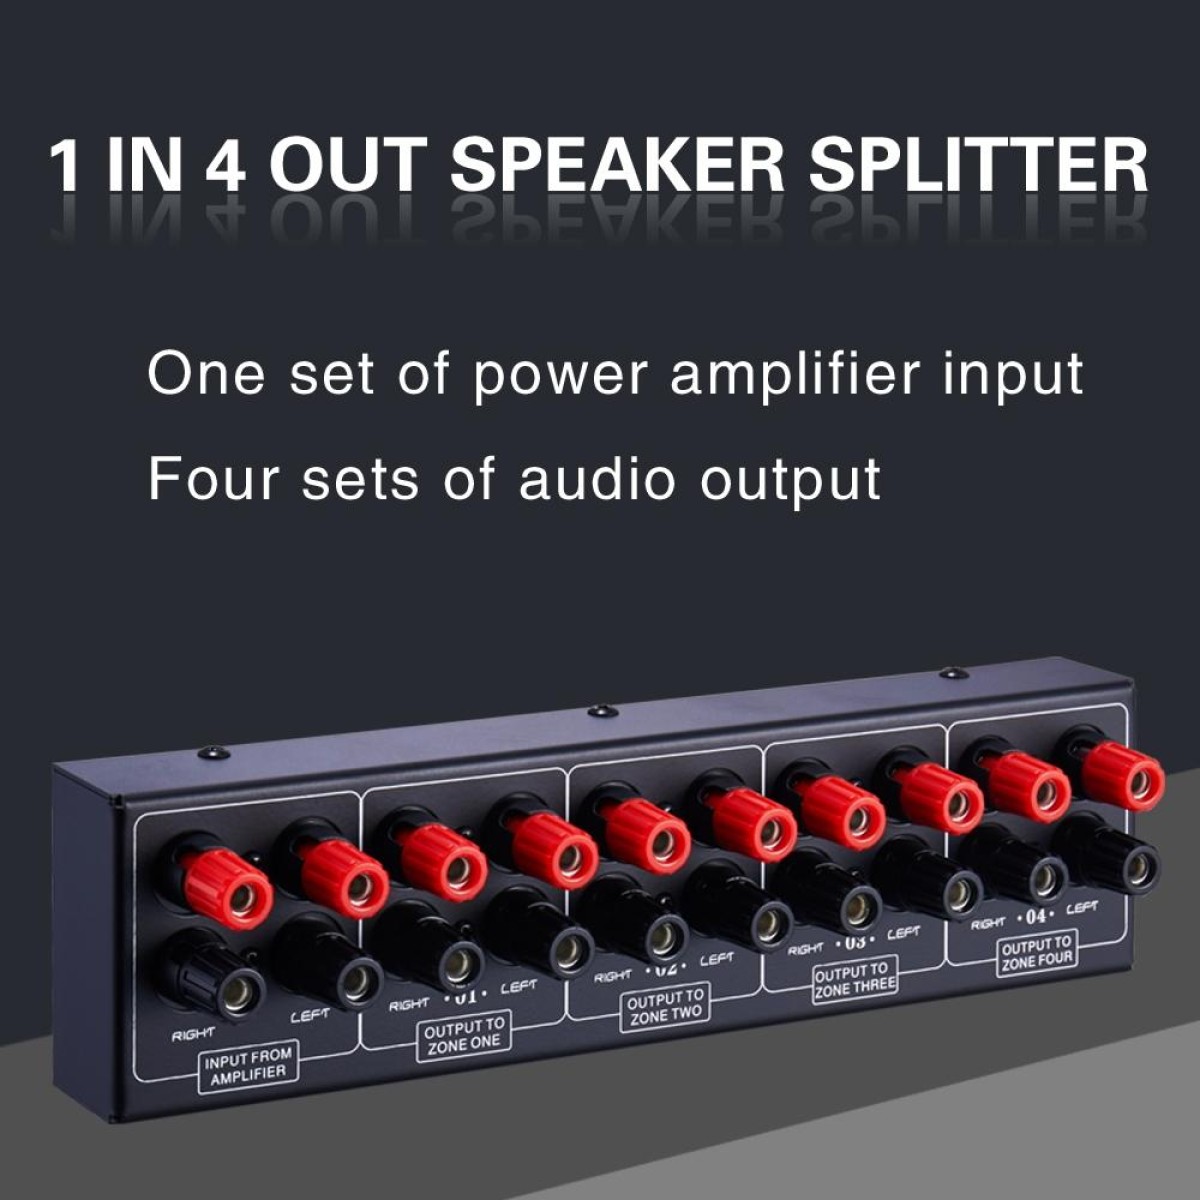 1 In And 4 Out Amplifier Sound Speaker Distributor, 4-Area Sound Source, Signal Distribution Panel, Single Audio Input, 300W Per Channel